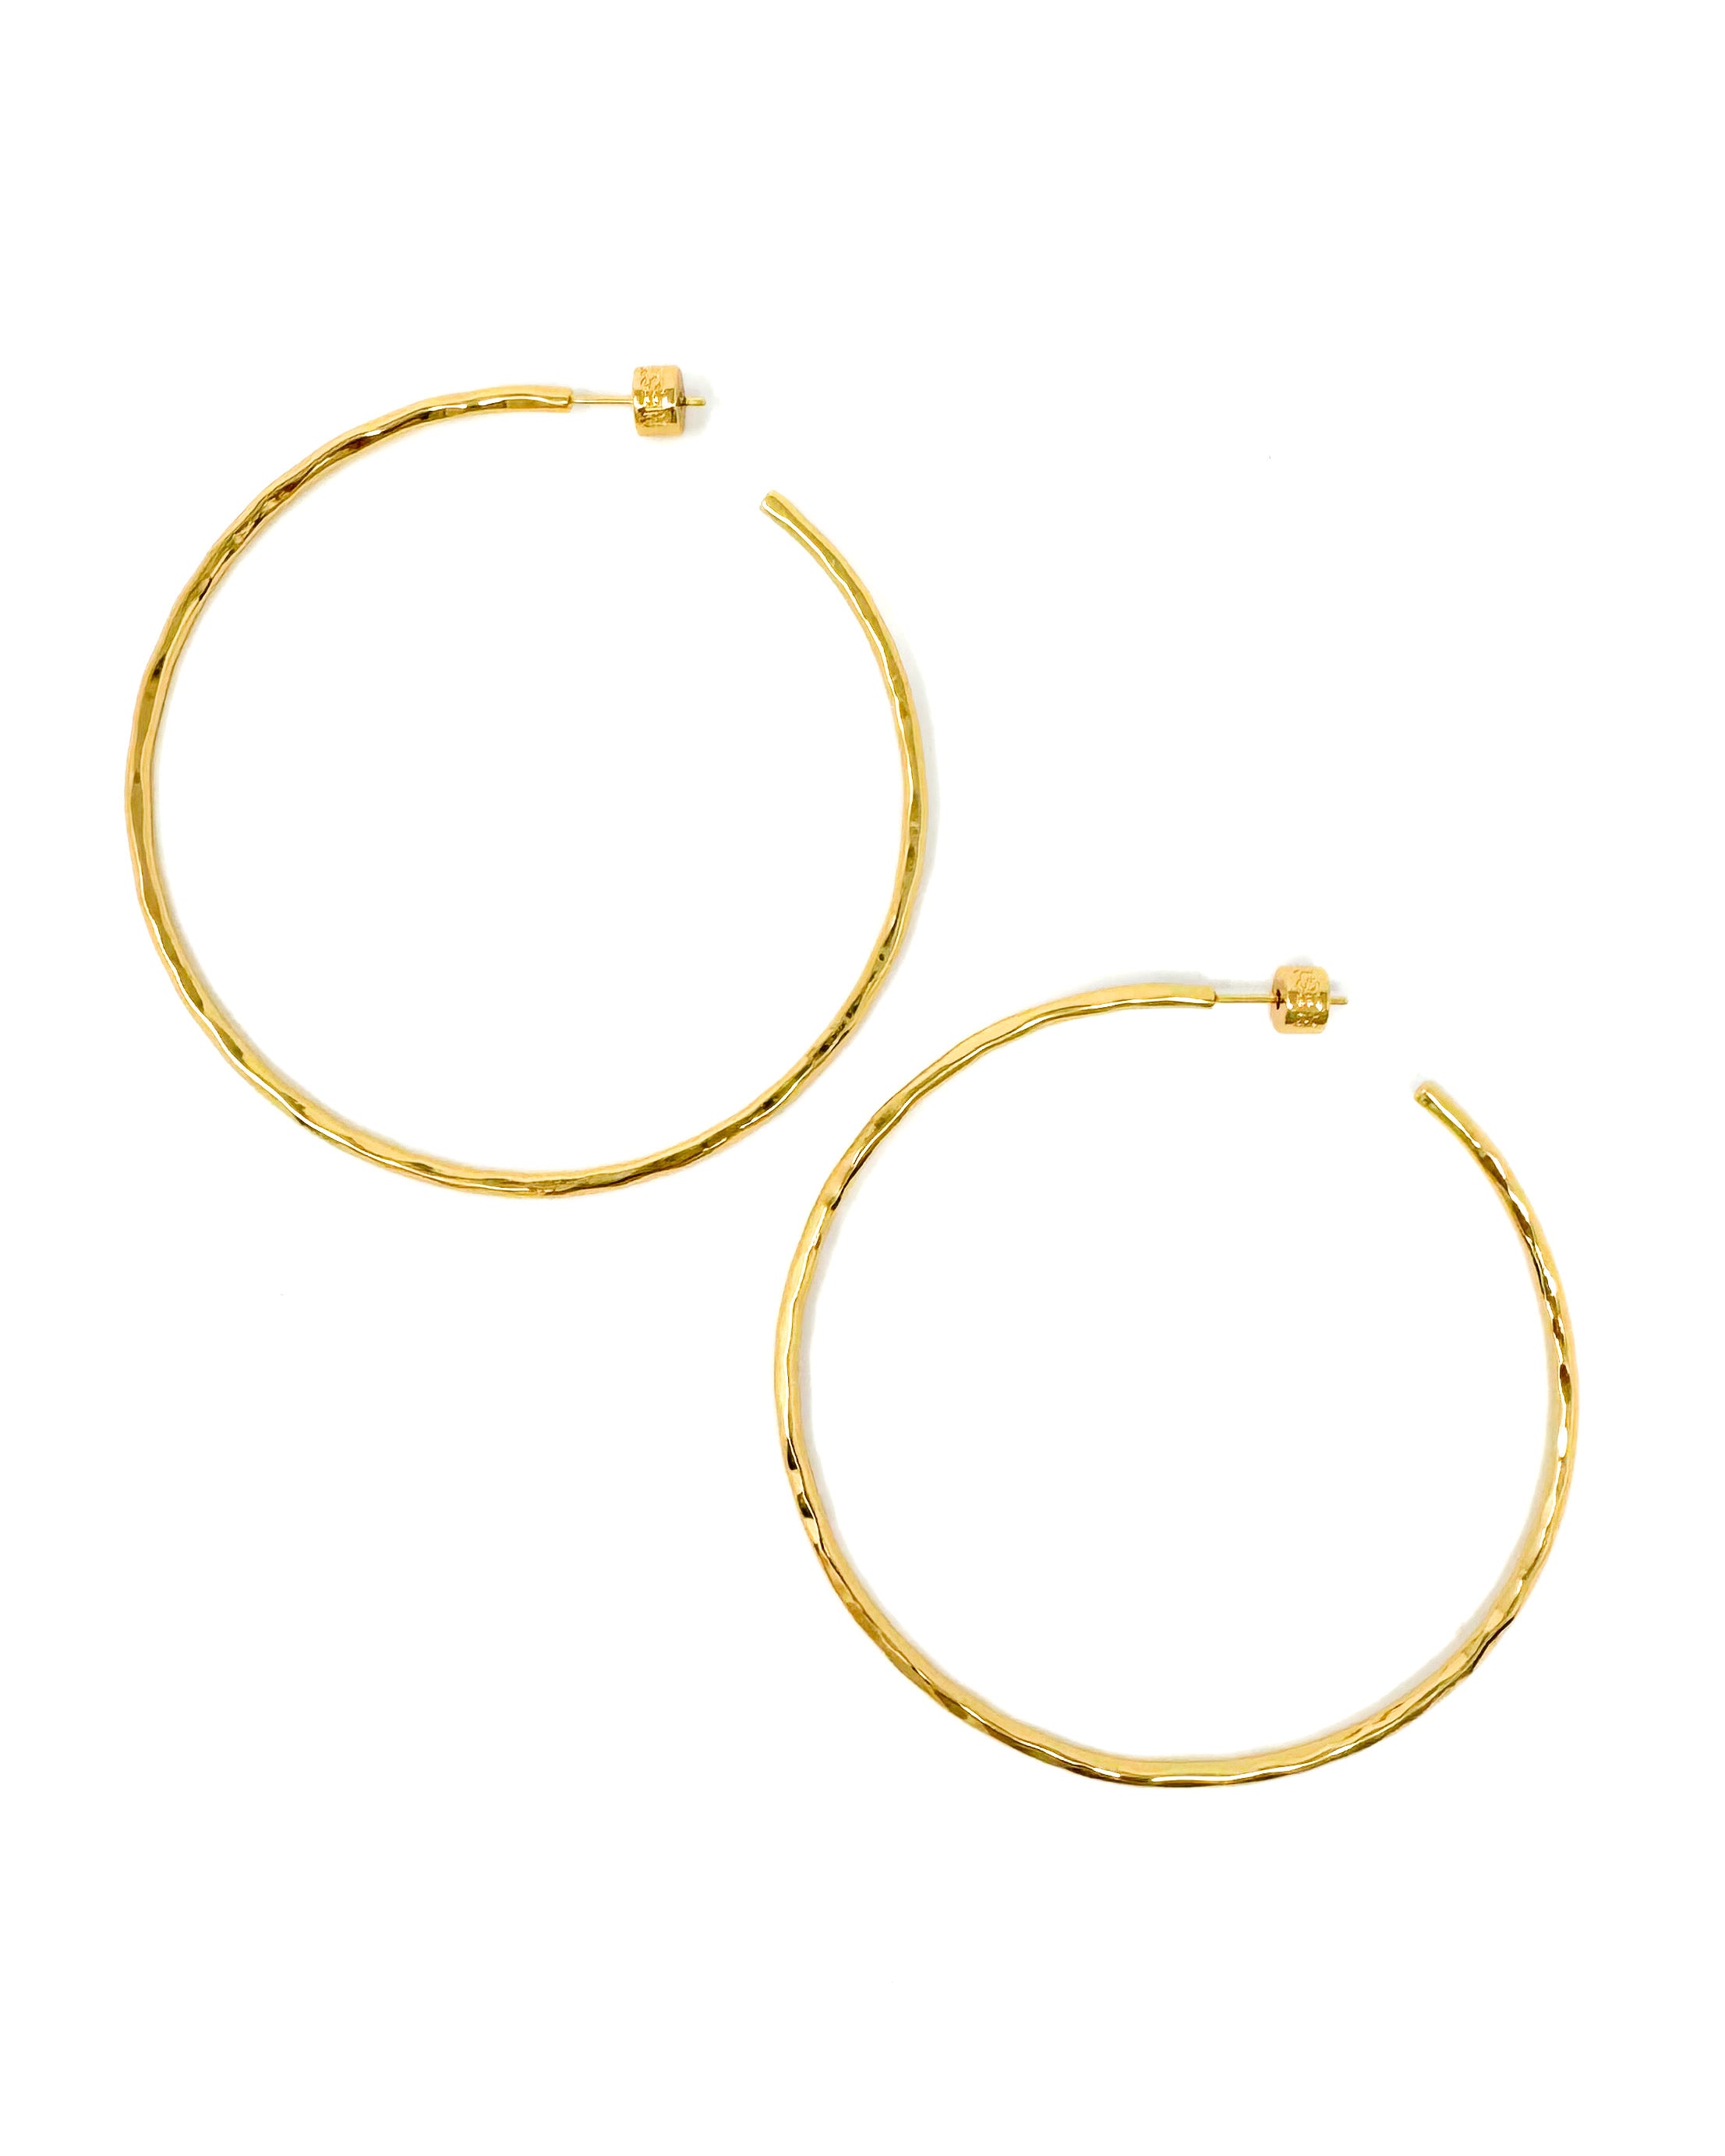 XL Hammered Gold Skinny Hoops